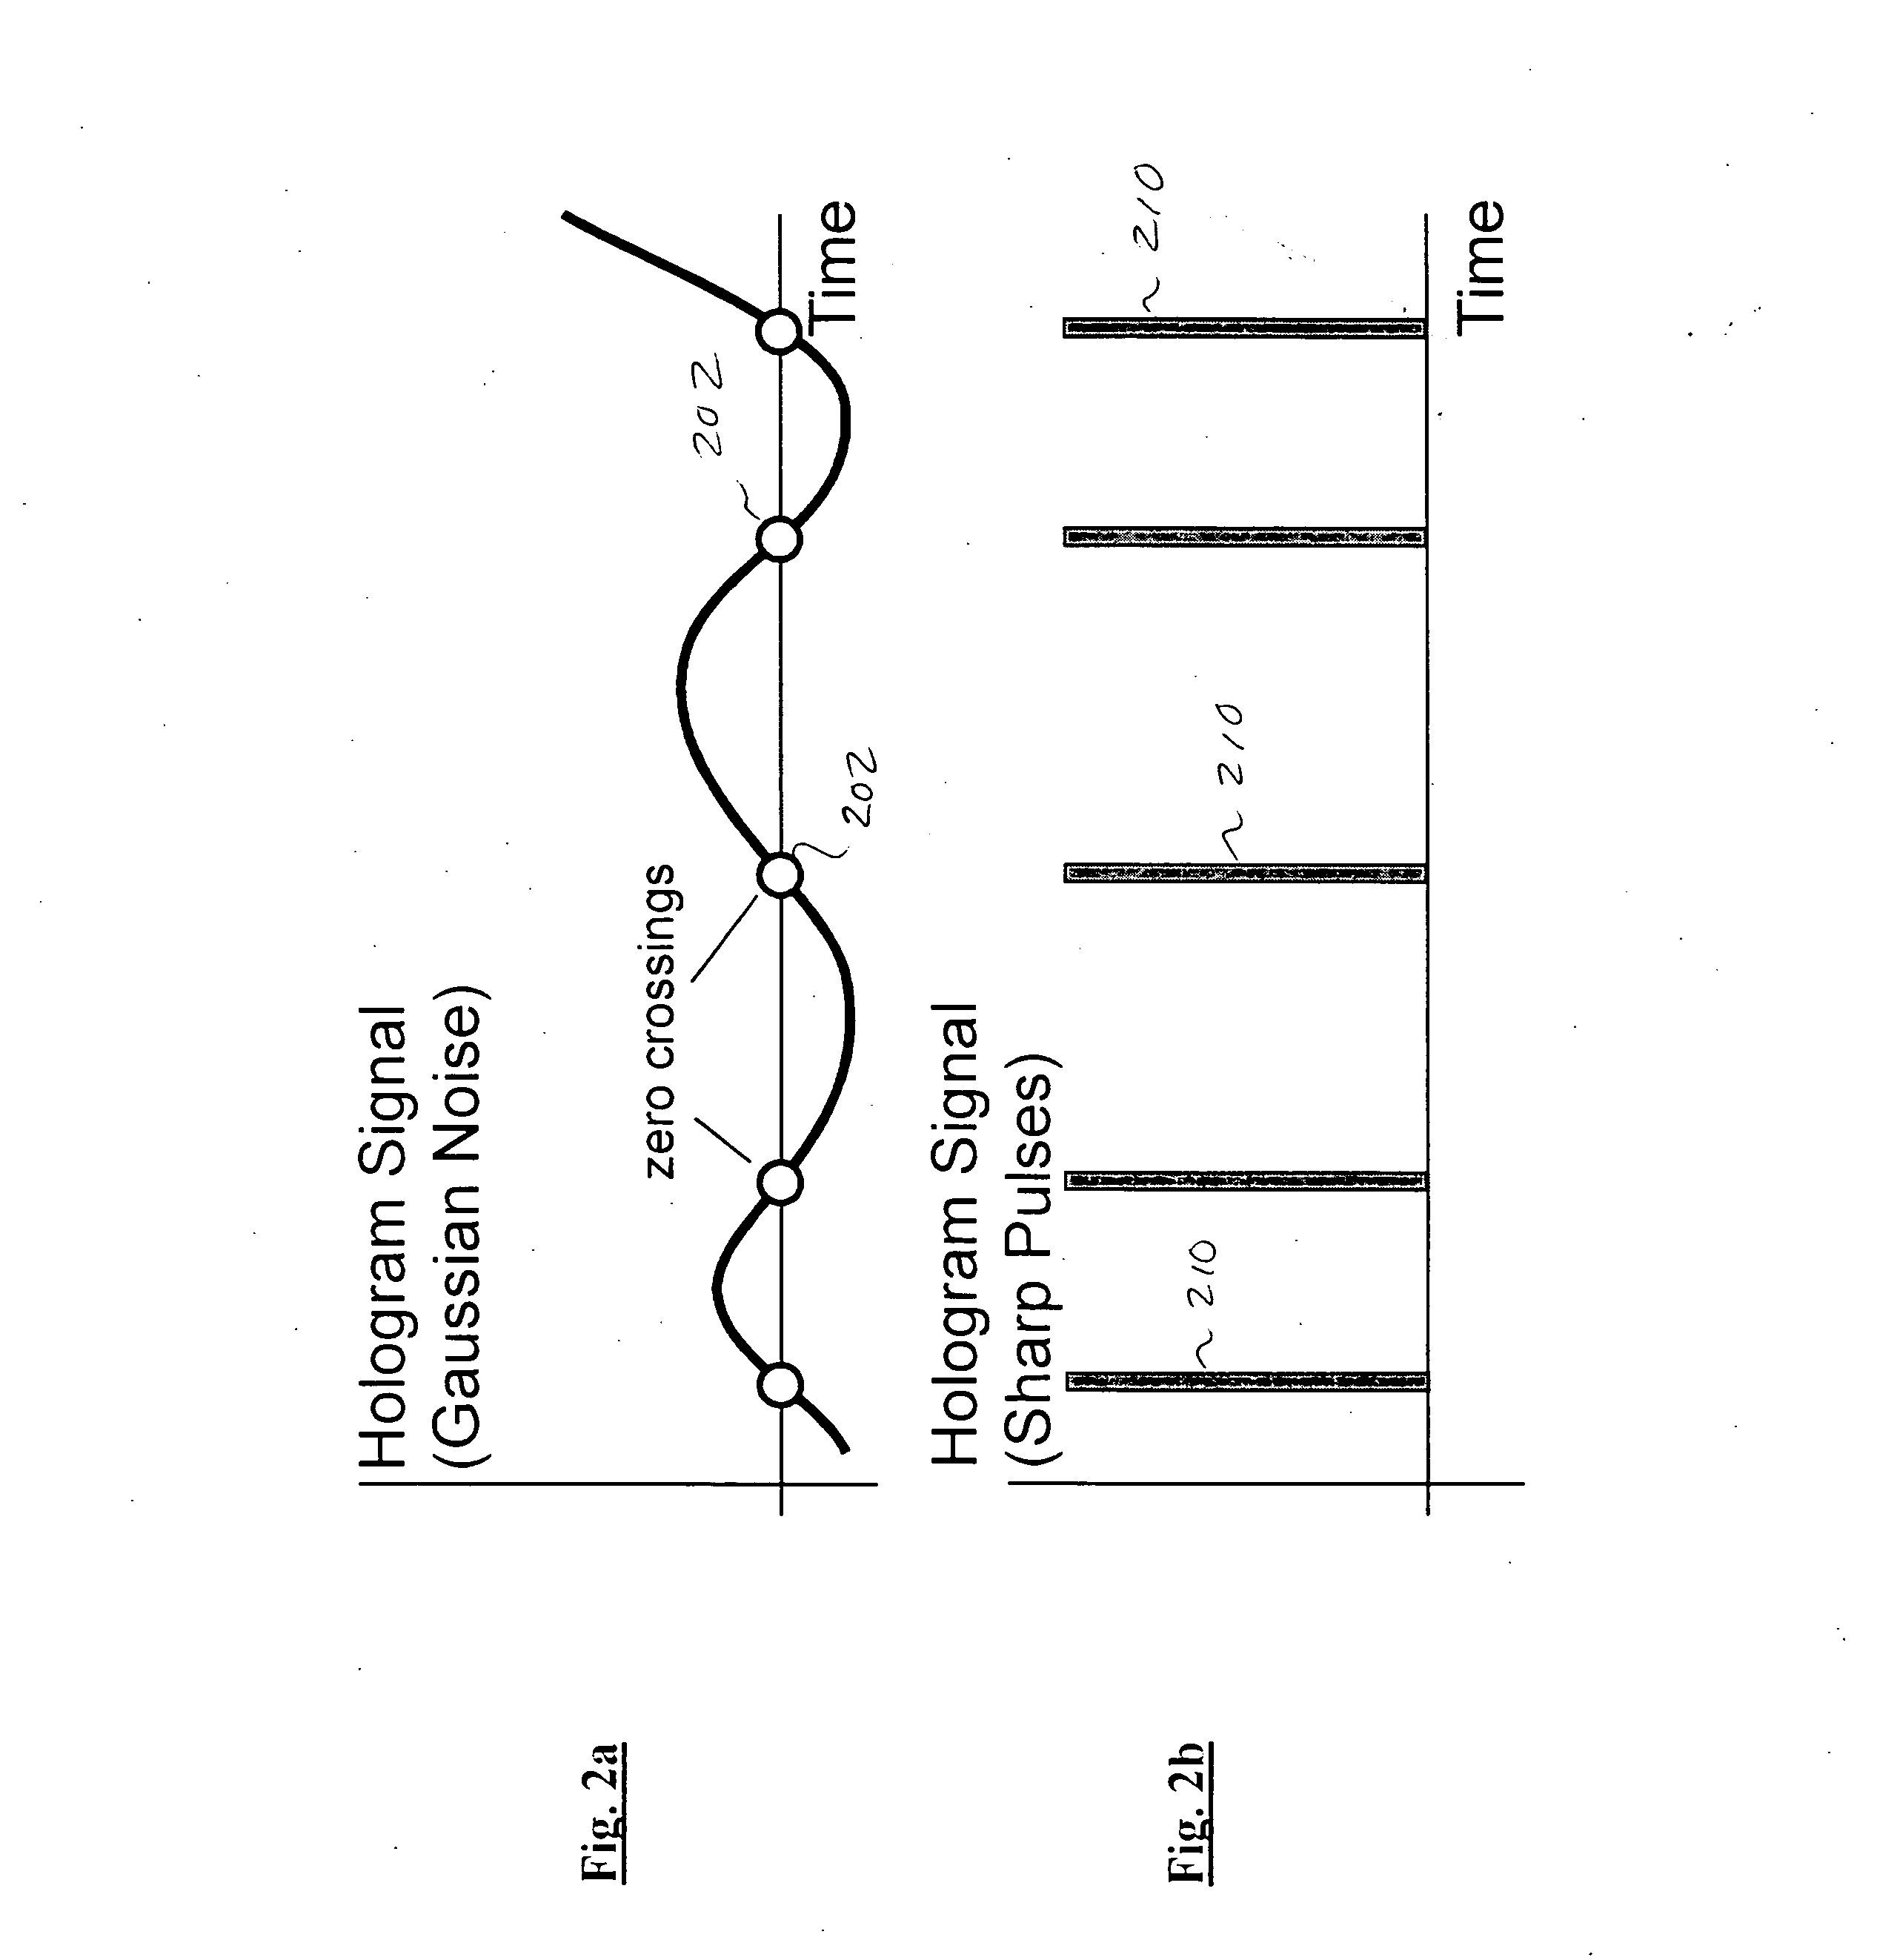 Miniaturized holographic communications apparatus and methods